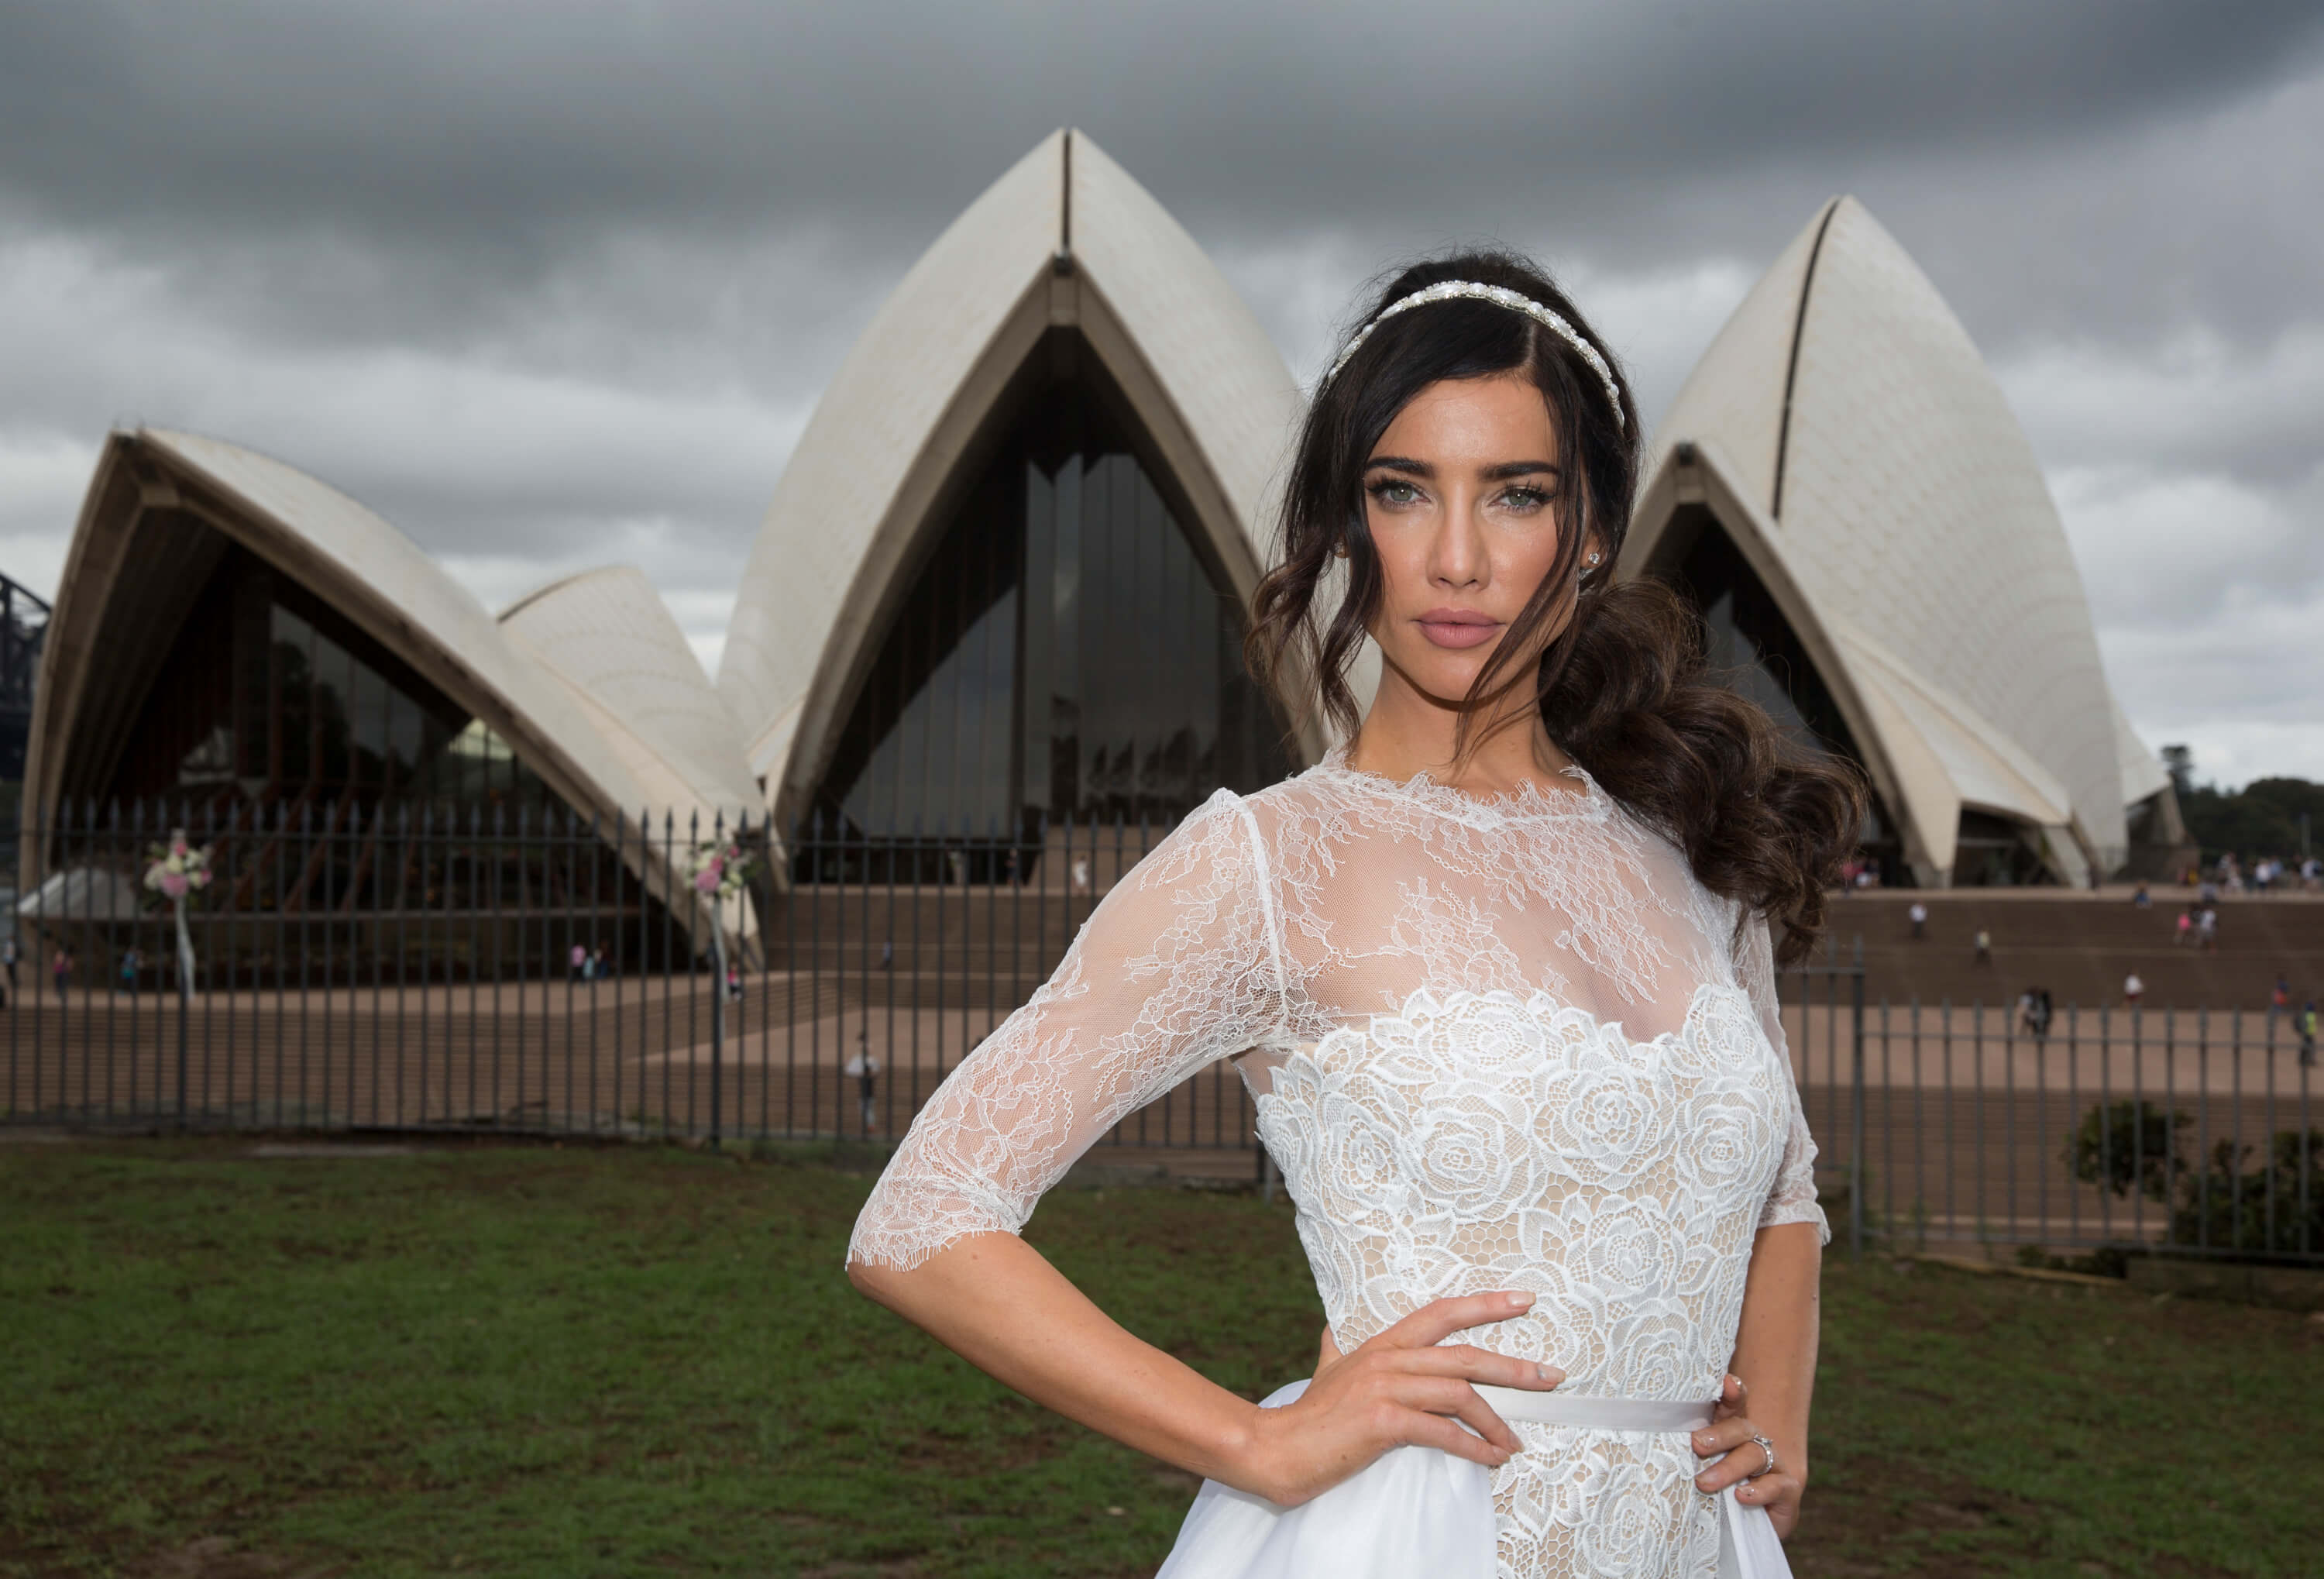 'The Bold and the Beautiful' star Jacqueline MacInnes Wood in a wedding dress; posing in front of the Sydney Opera House.